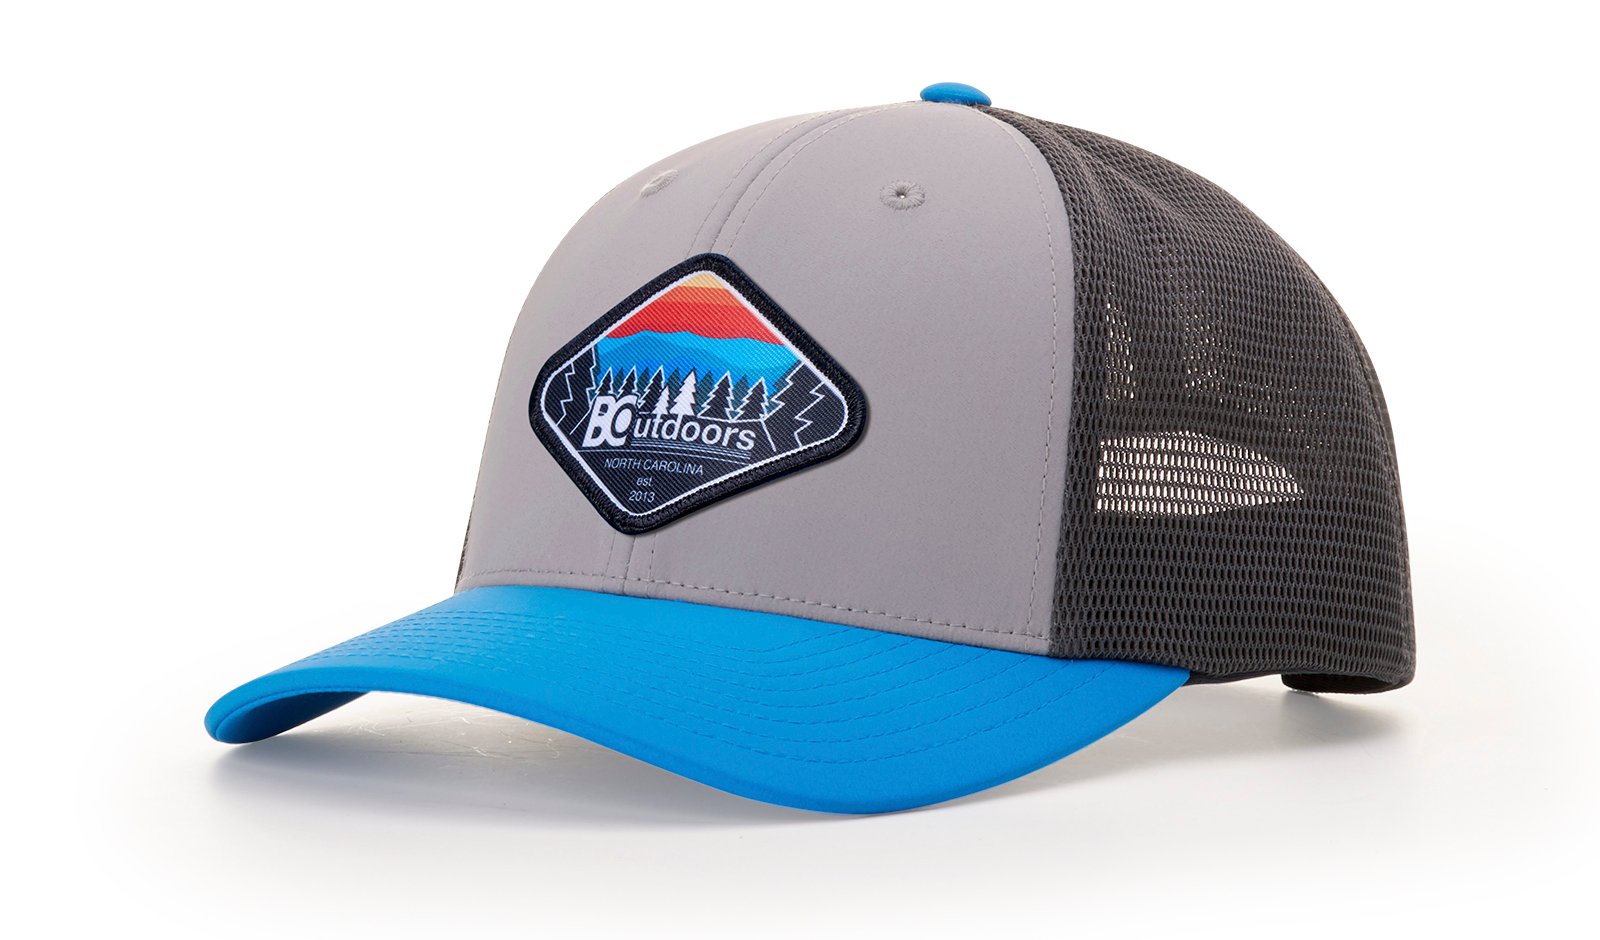 Custom sublimated hat with BC Outdoors logo